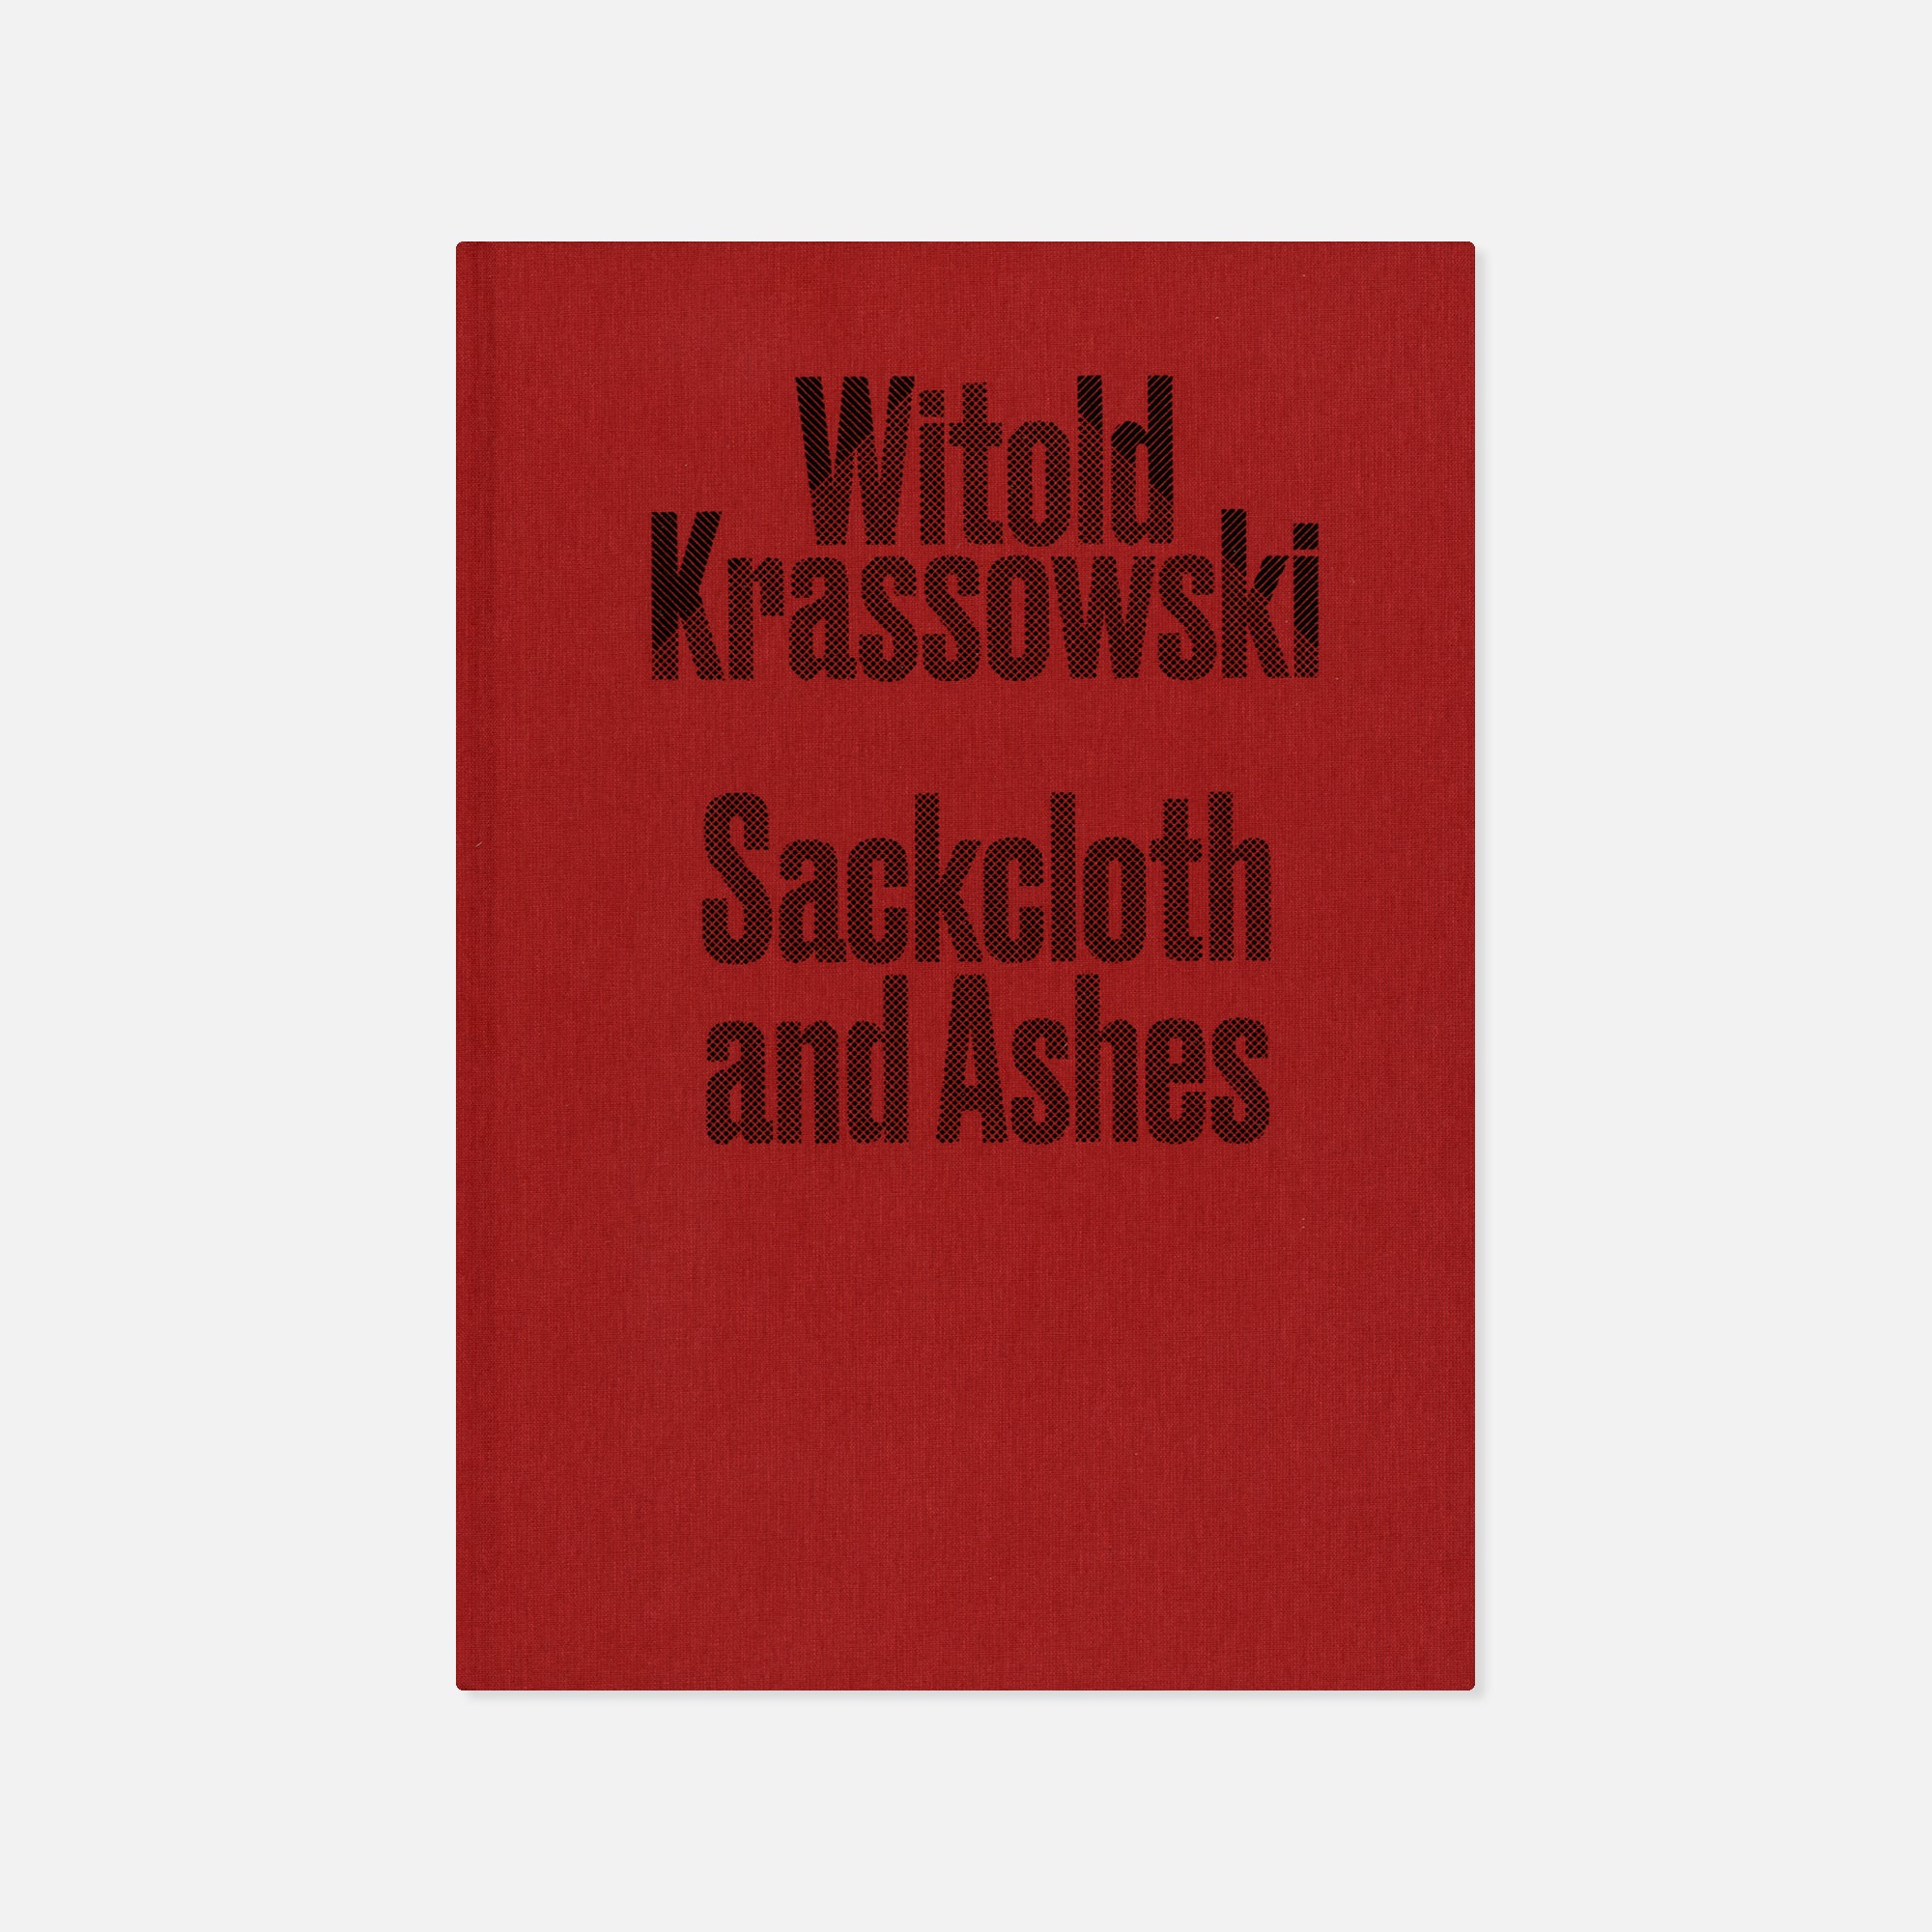 Witold Krassowski — Sackcloth and Ashes